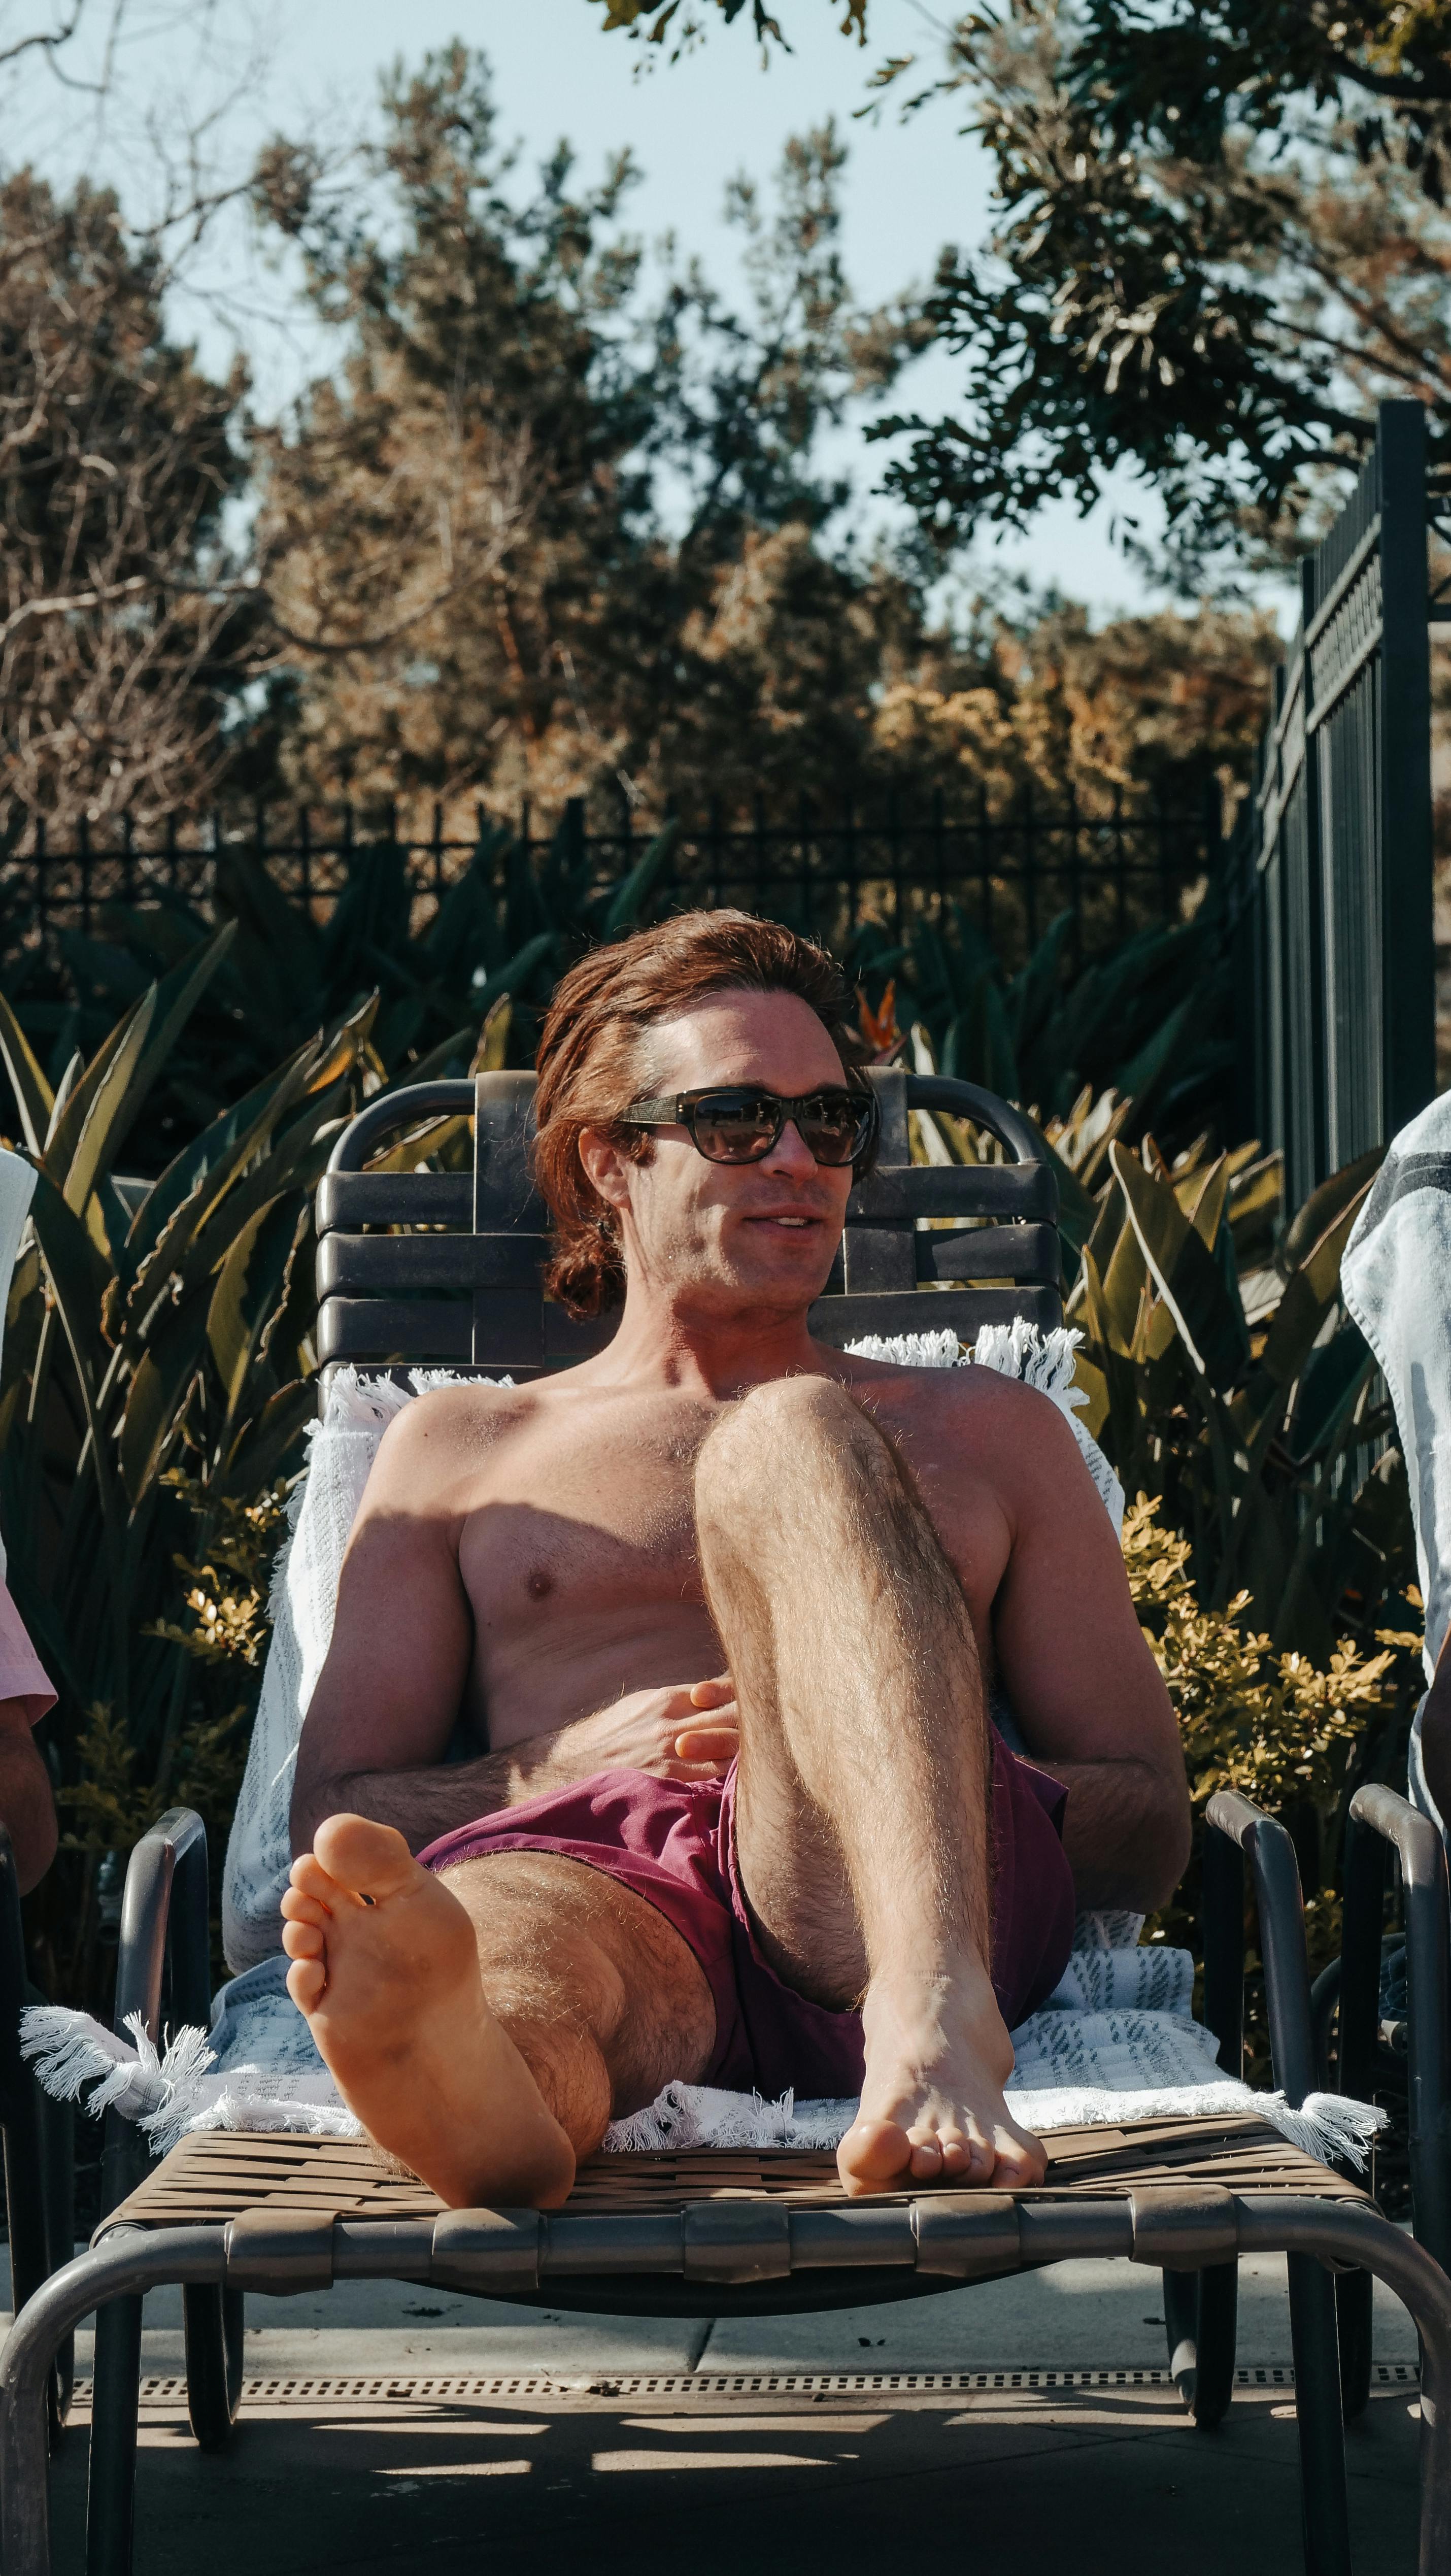 A man relaxing on the sun lounger. | Photo:Pexels